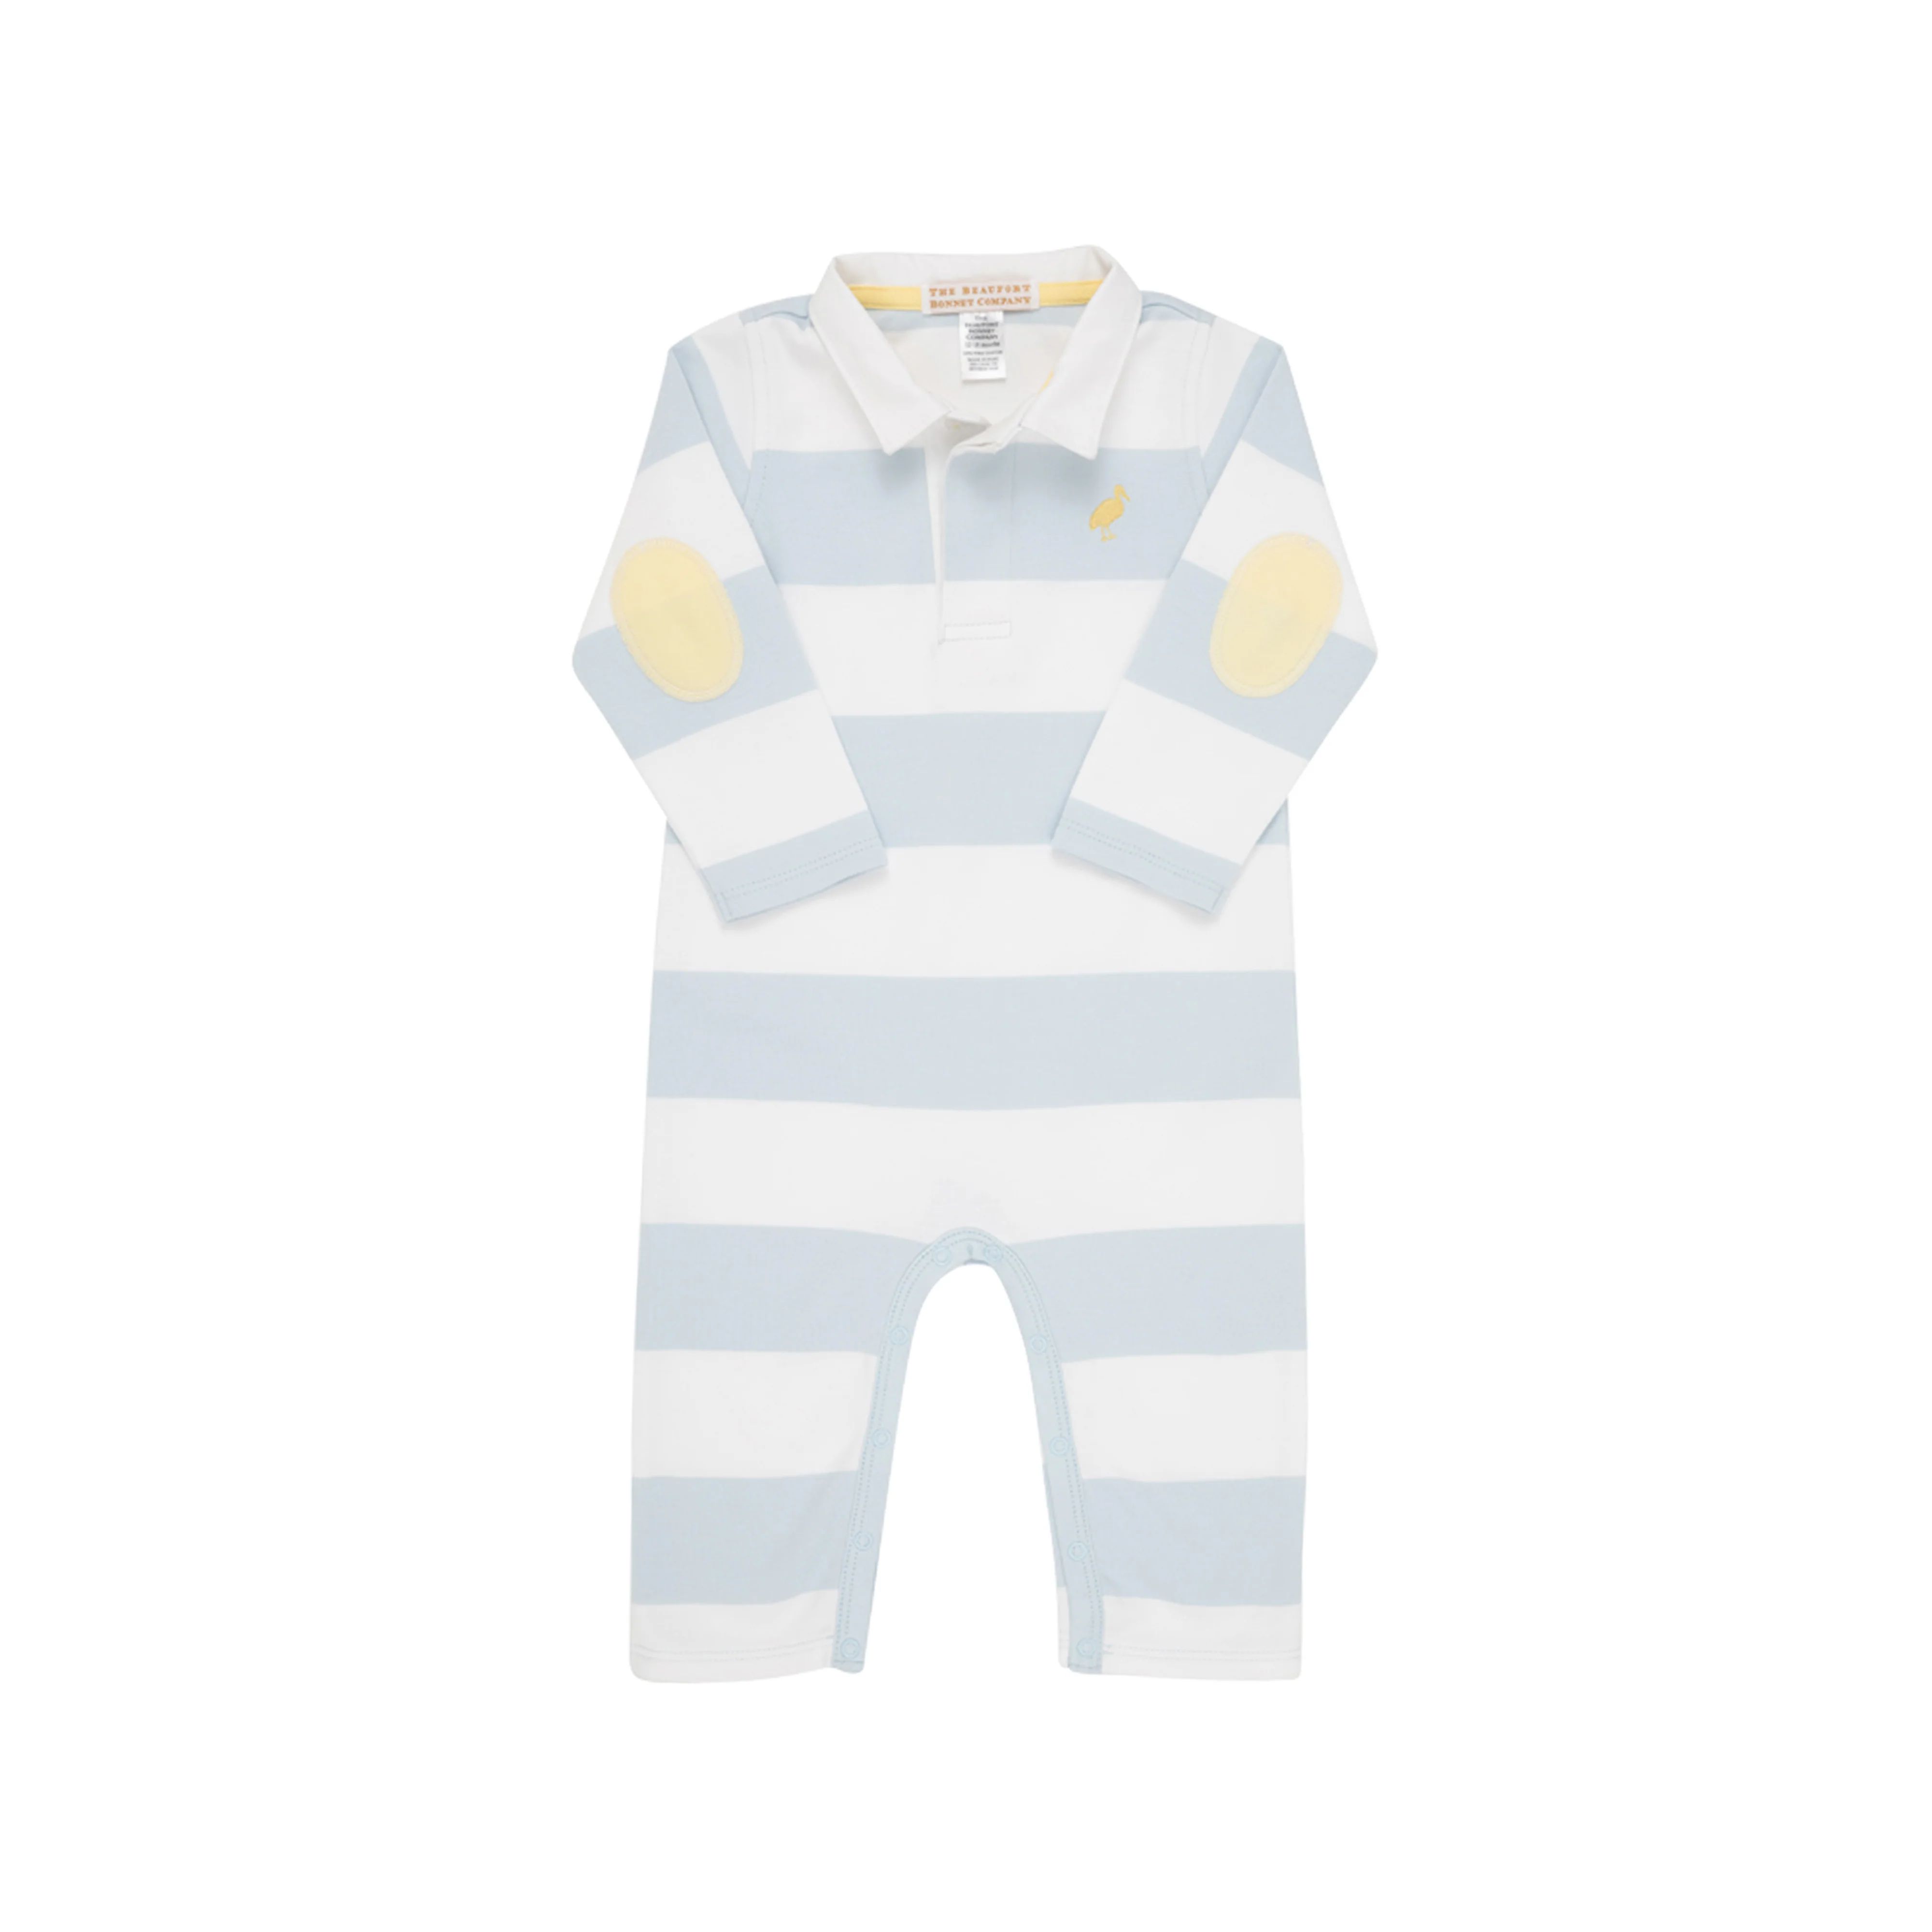 Sir Proper's Rugby Romper - Buckhead Blue & White Stripe with Bellport Butter Yellow Stork | The Beaufort Bonnet Company